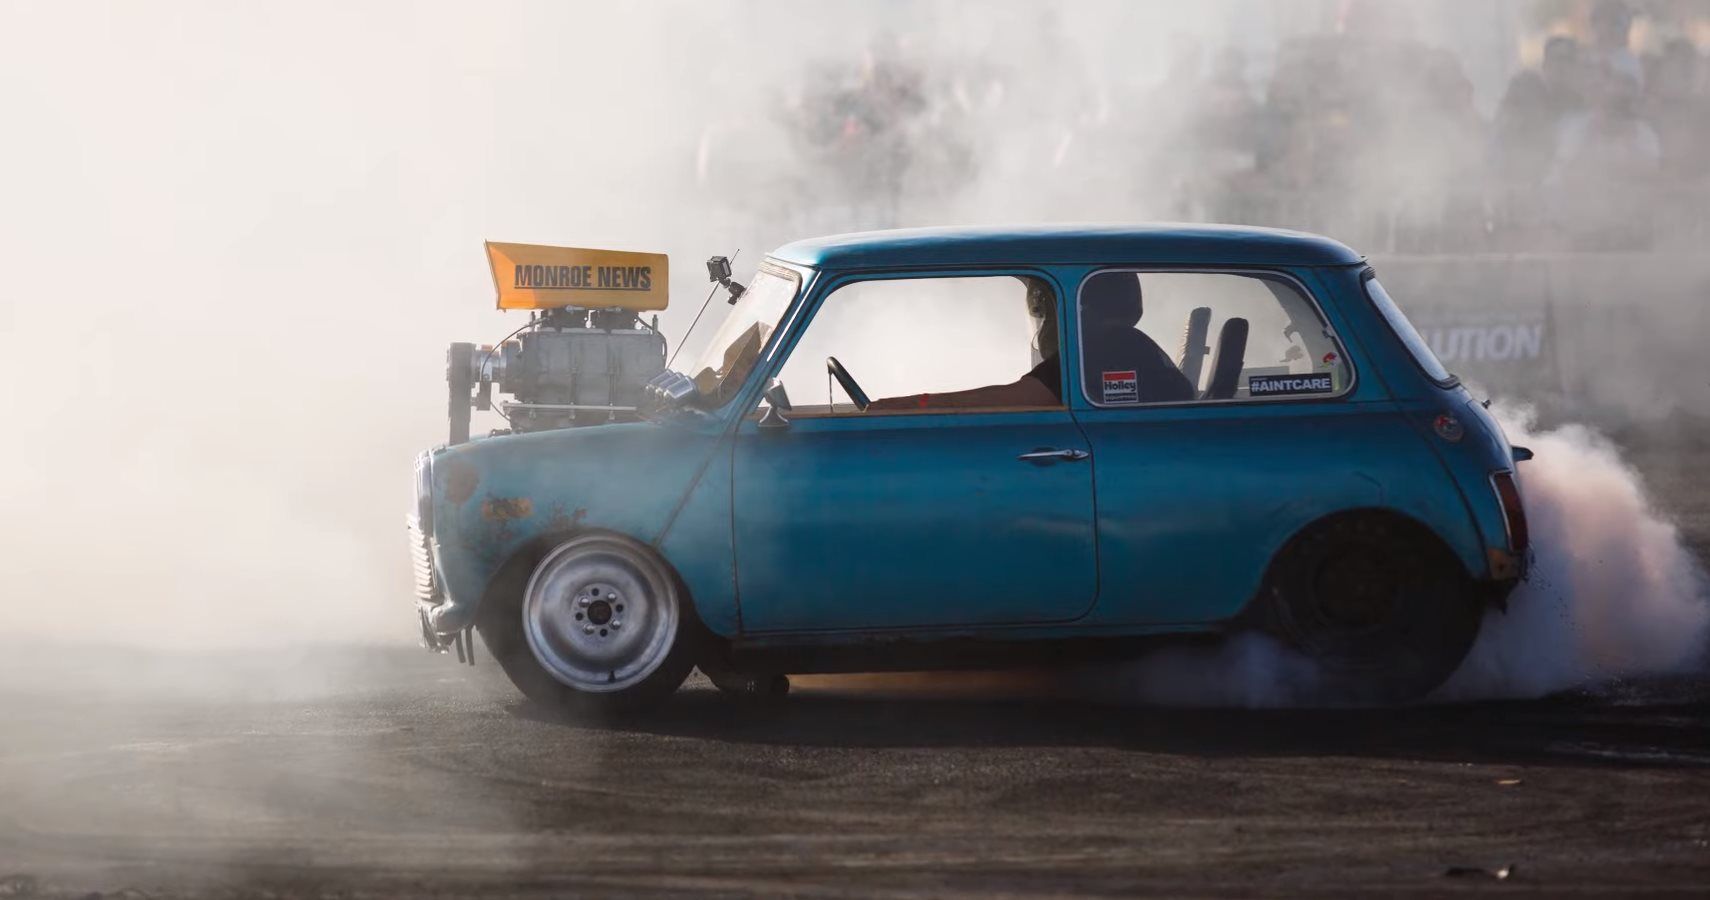 Old-School Mini Powered By A 600 HP Supercharged LS Crate Engine Is Apocalyptically Loud